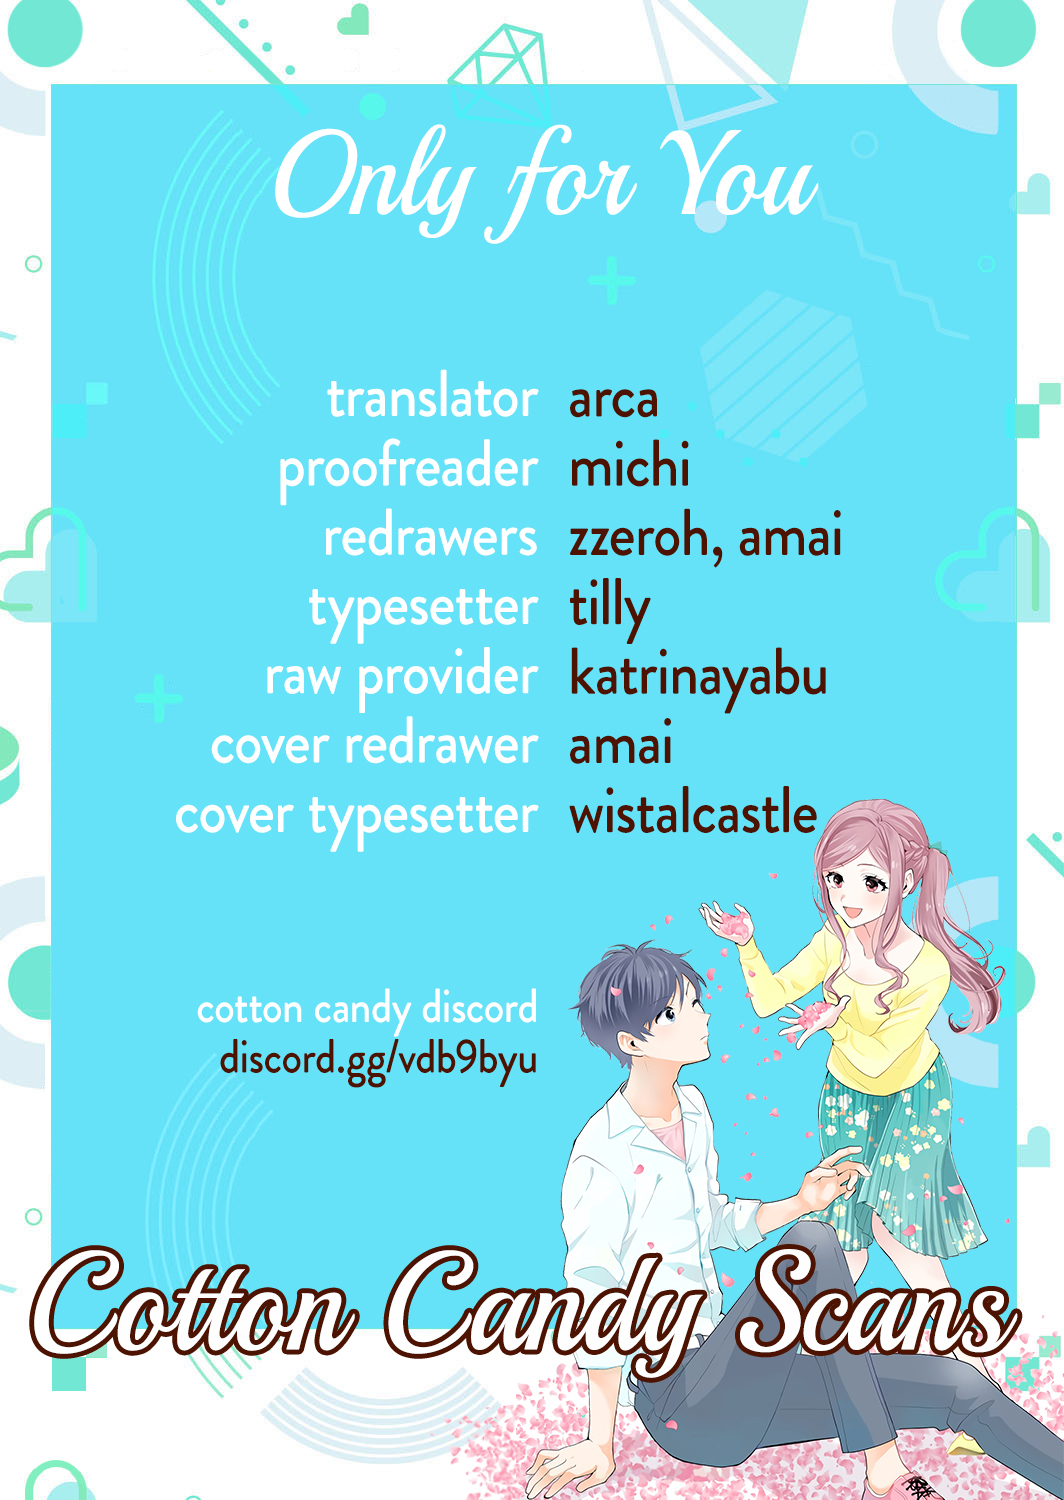 Only for You Vol. 1 Ch. 4 episode 4